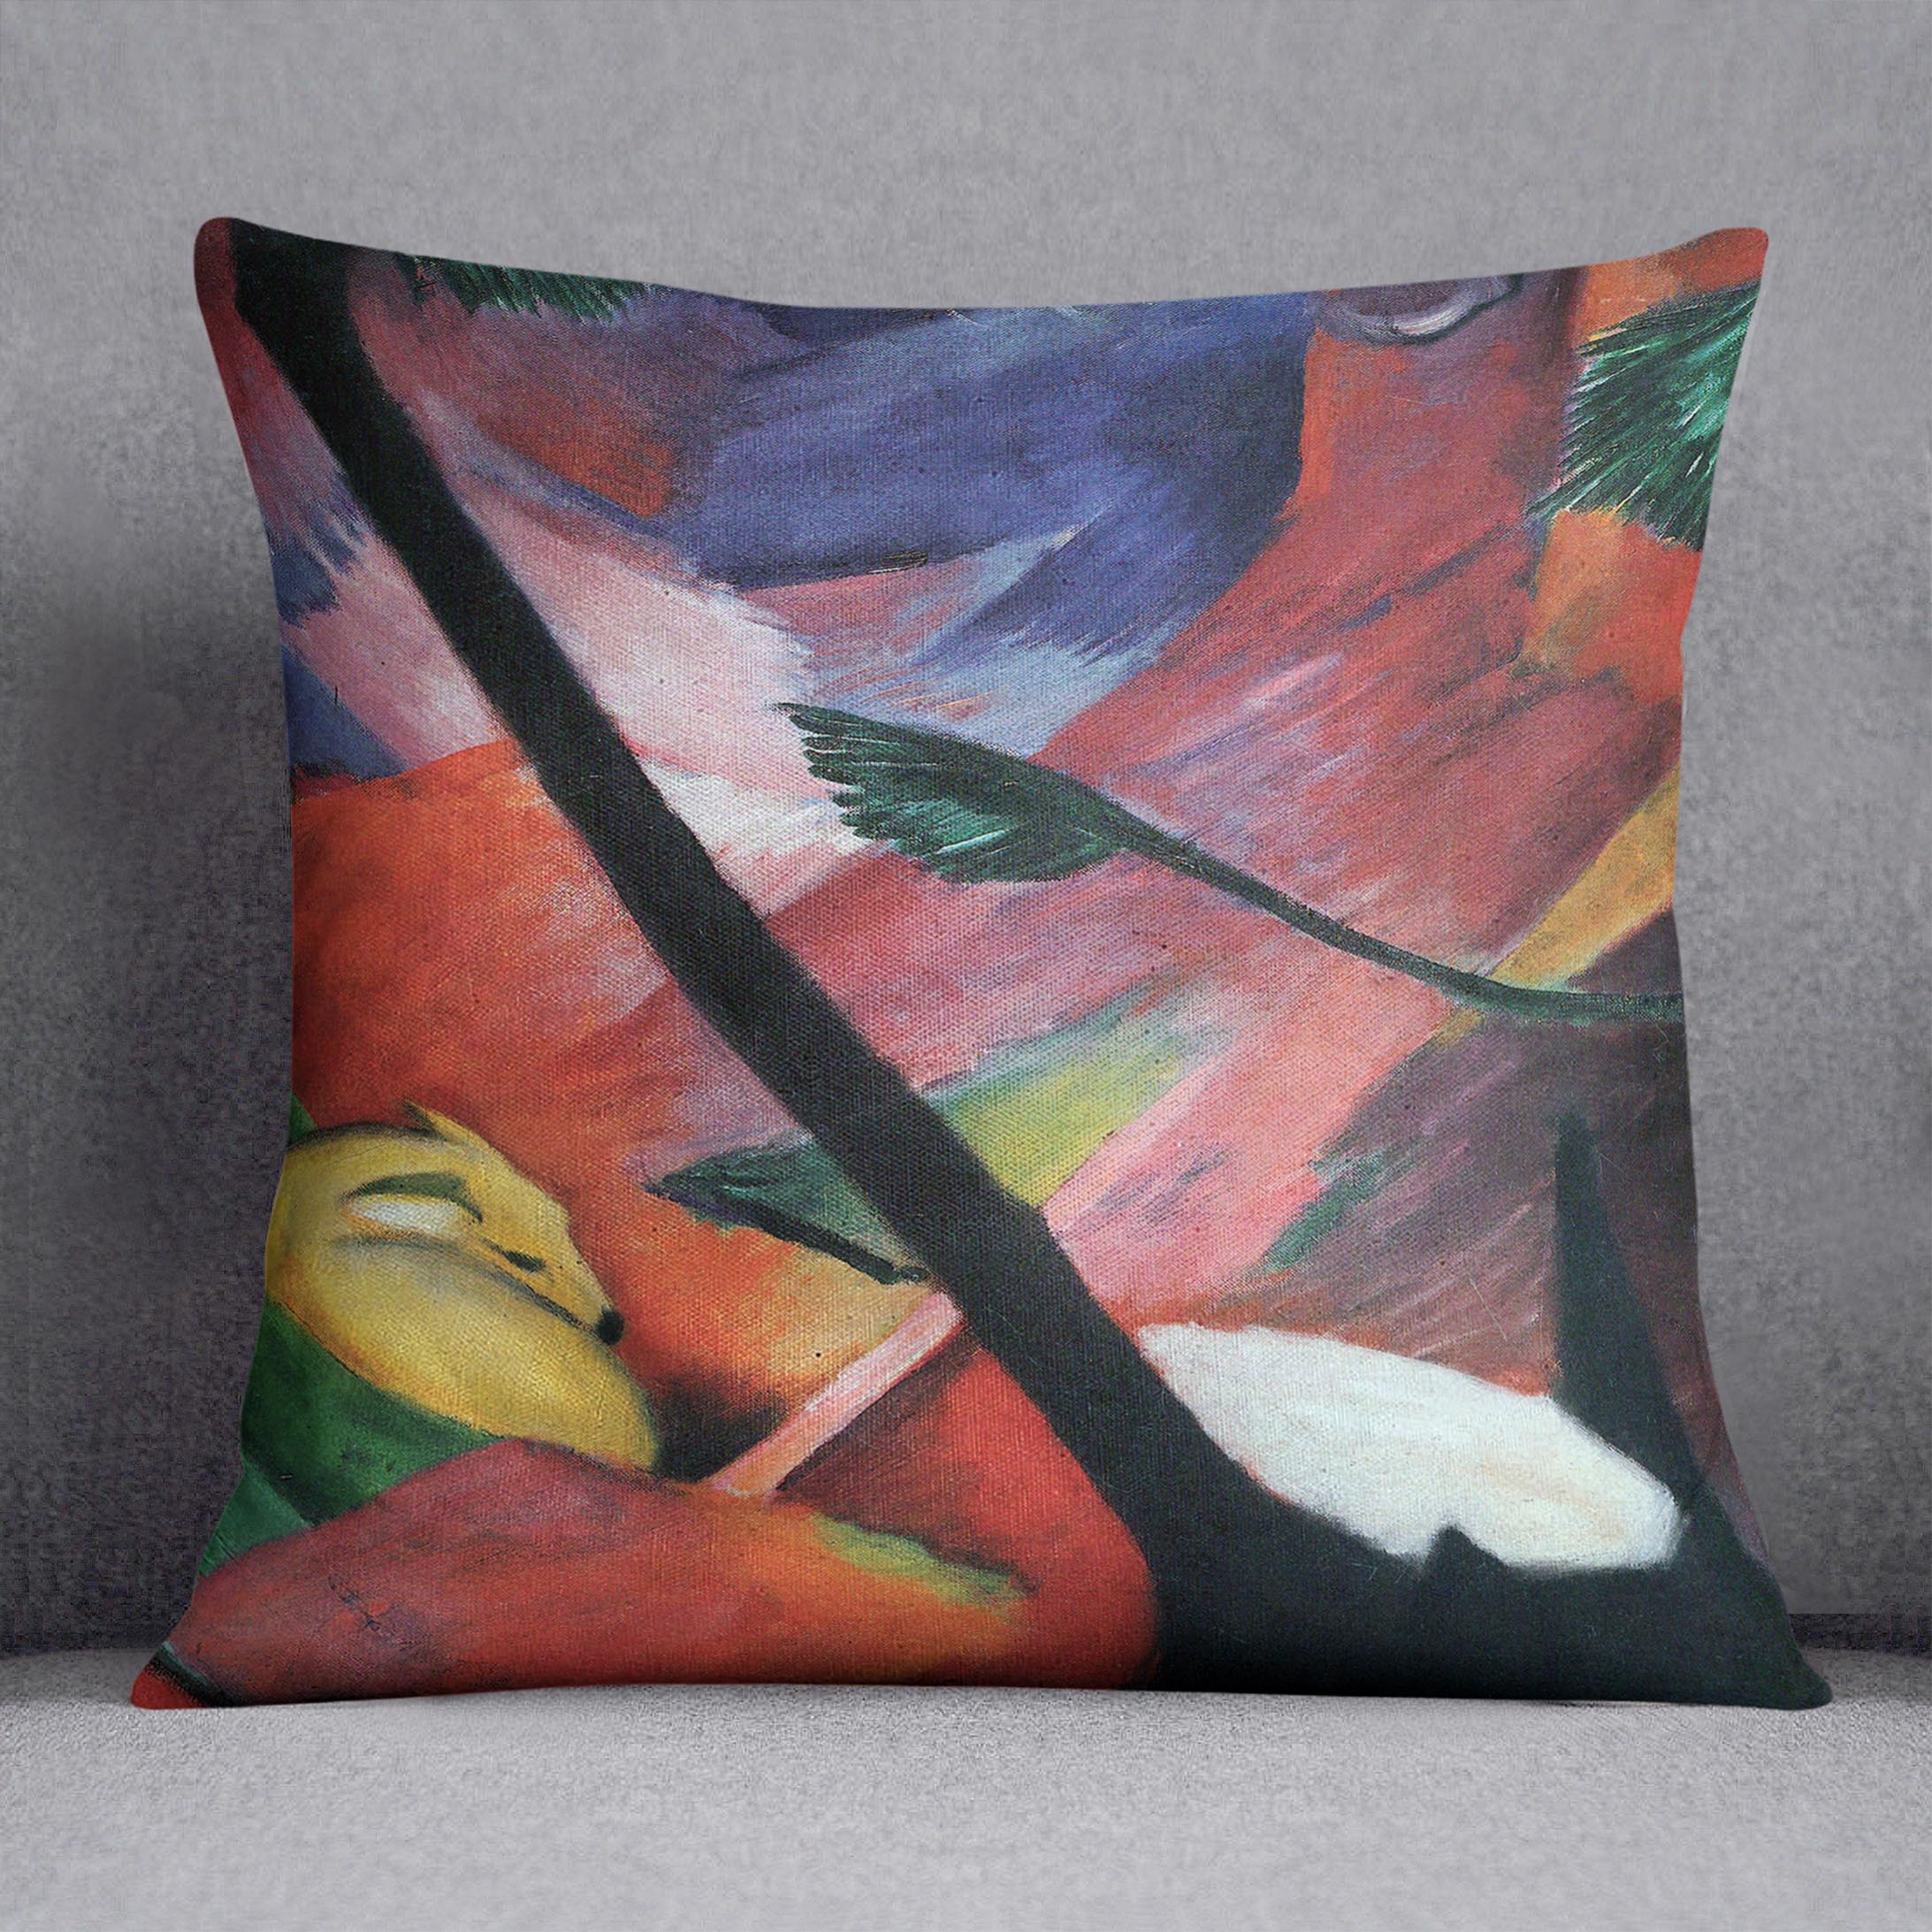 Deer in the forest II by Franz Marc Cushion